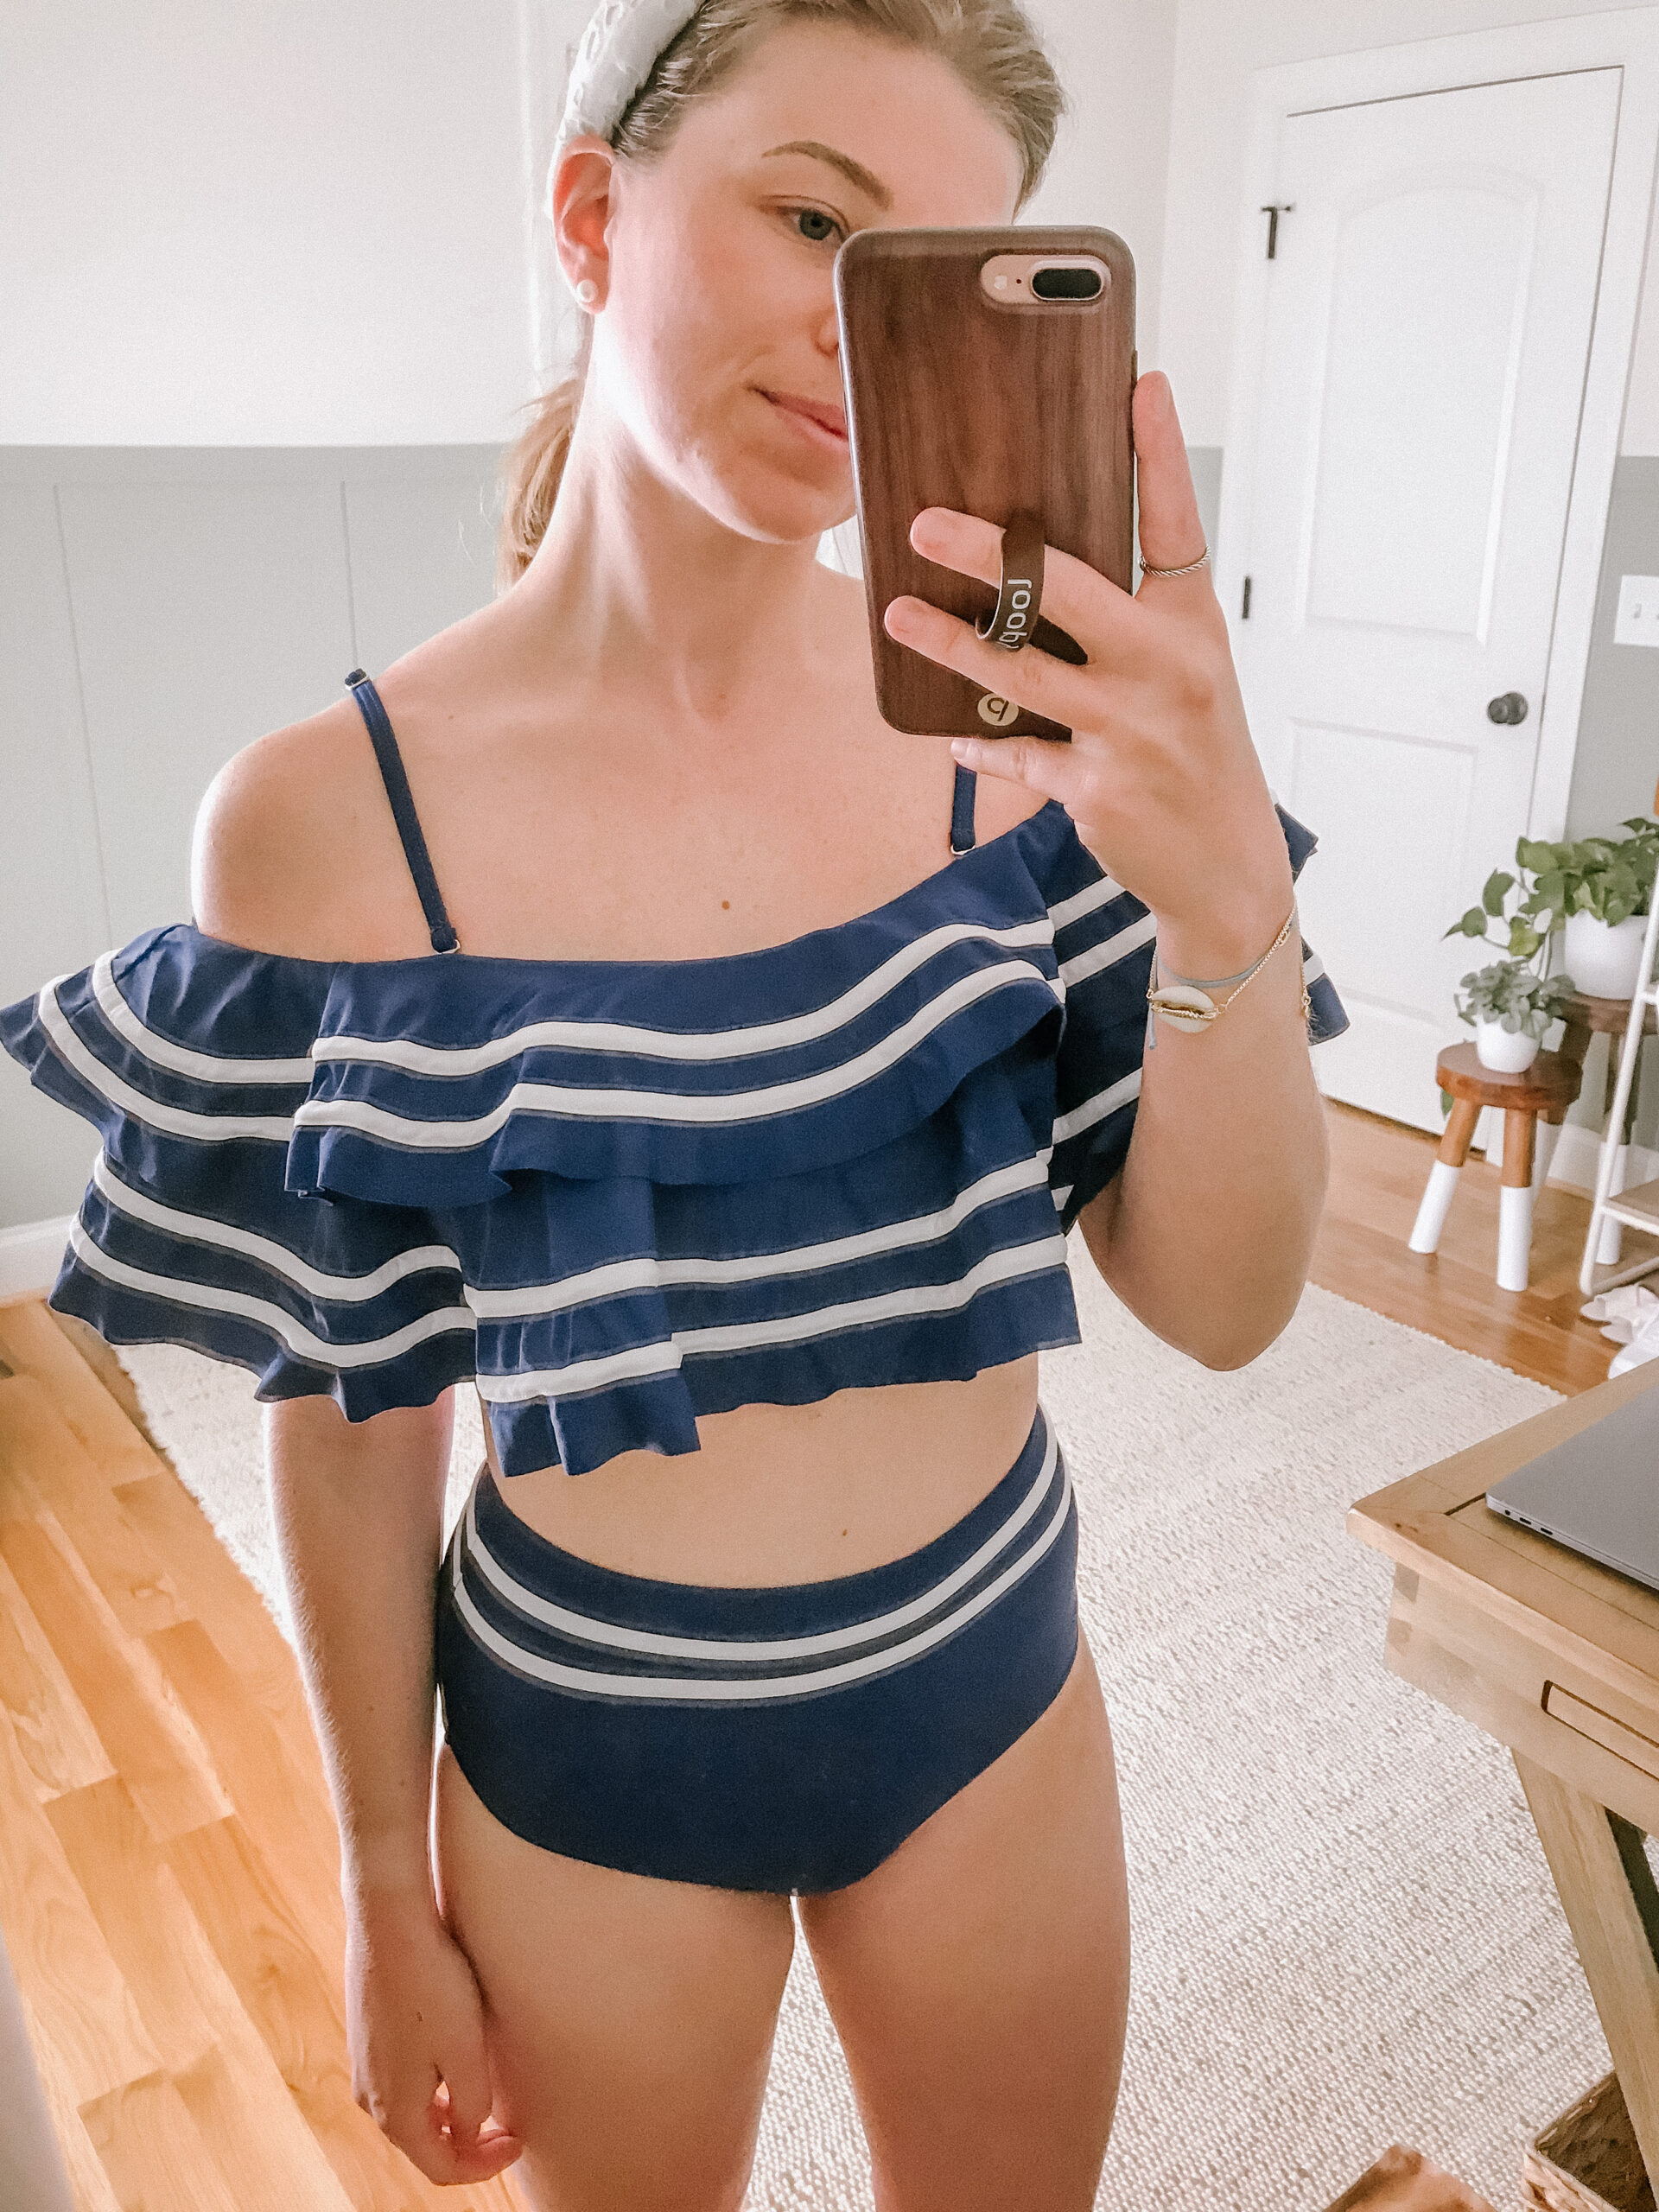 Affordable Swimsuits for Summer | Off the Shoulder High-waisted Bikini | Louella Reese